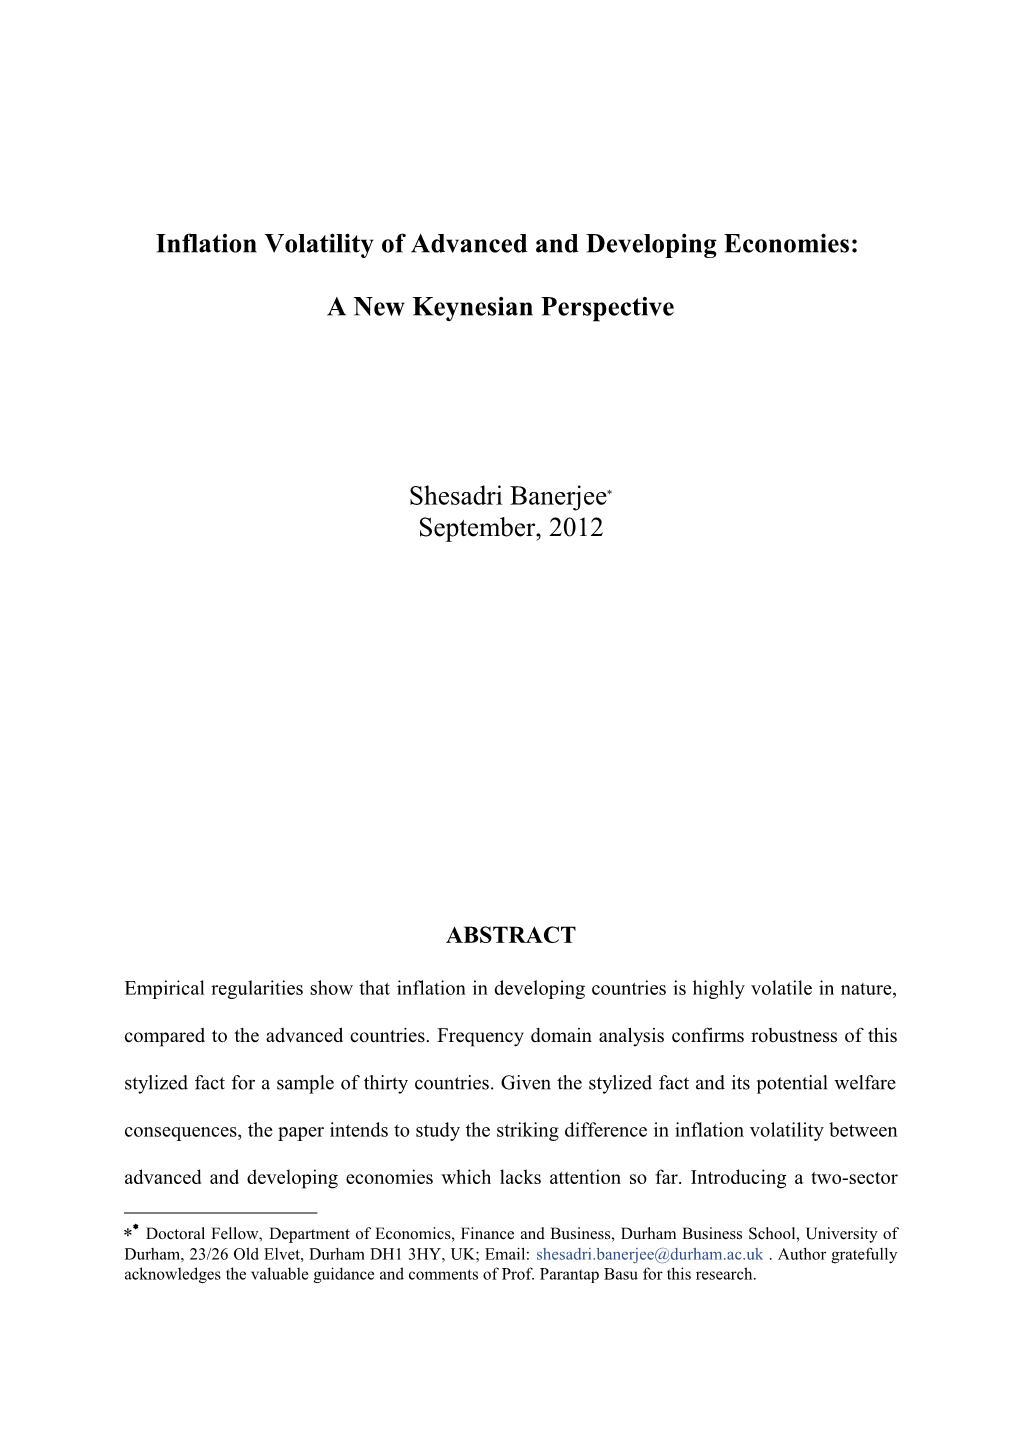 Inflation Volatility of Advanced and Developing Economies